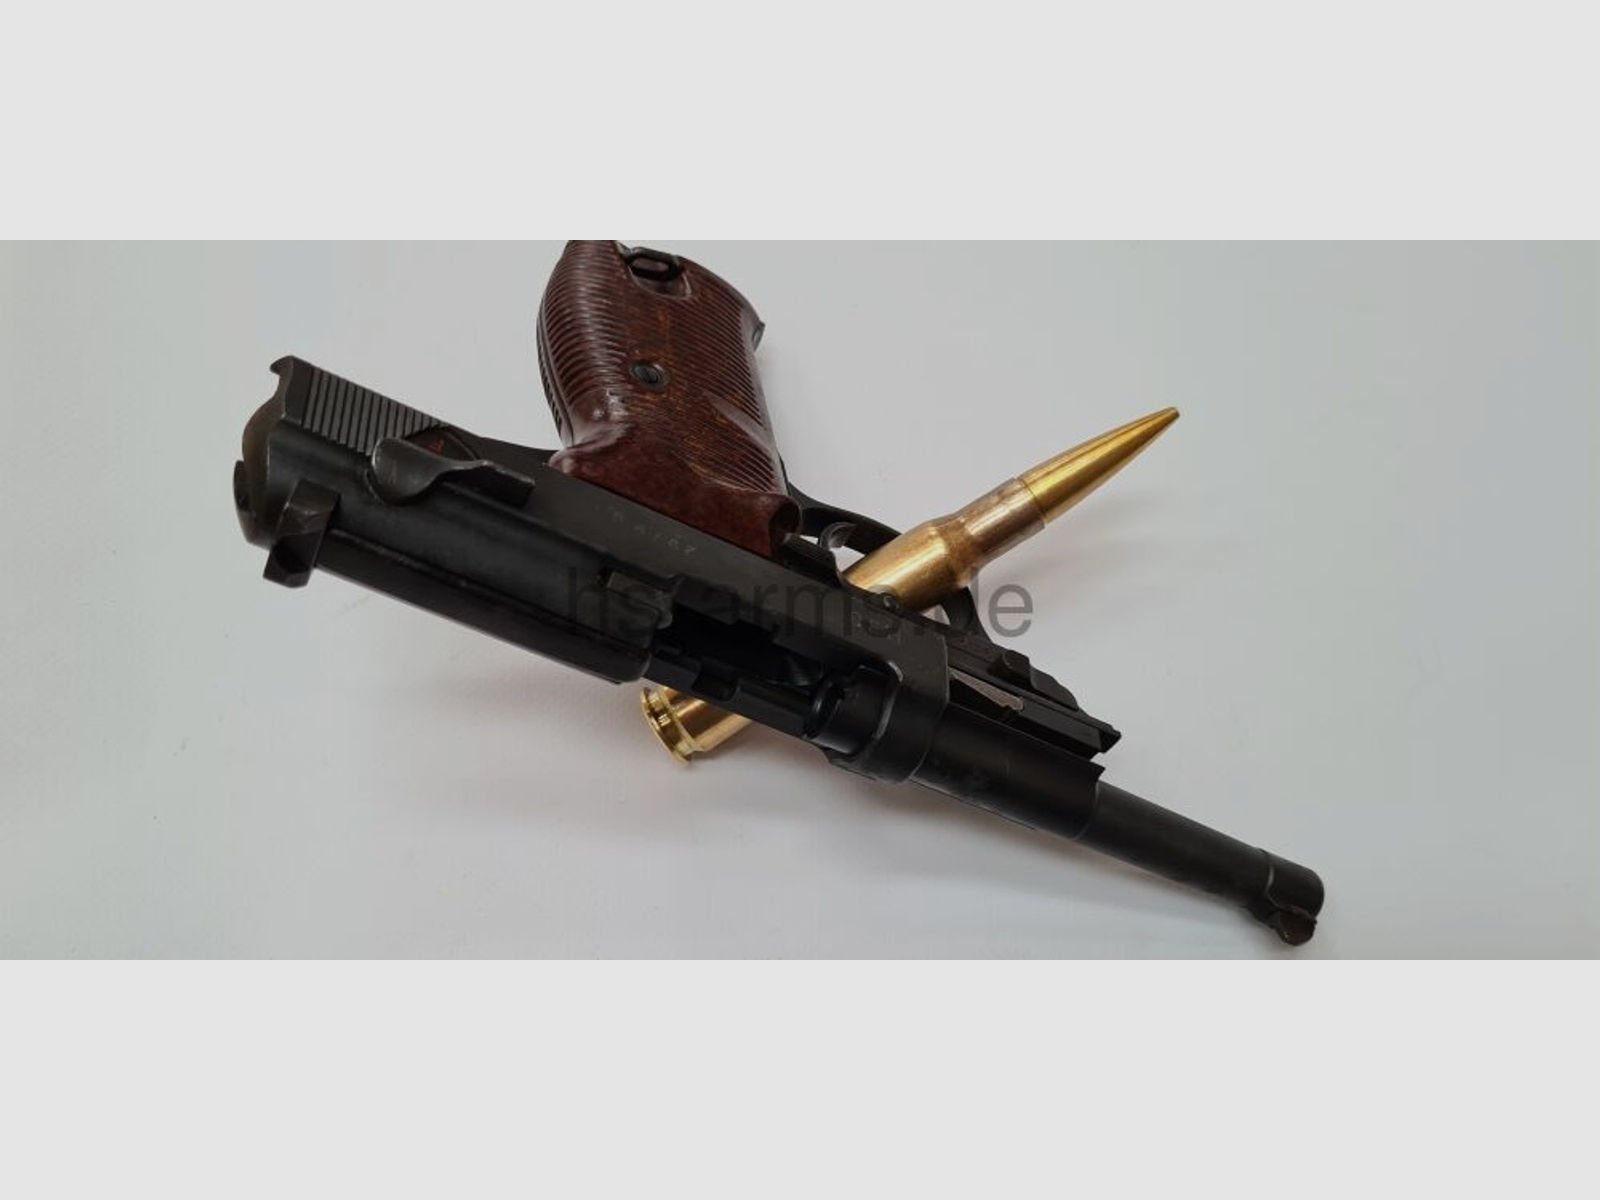 Walther	 Walther P38 "ac44"